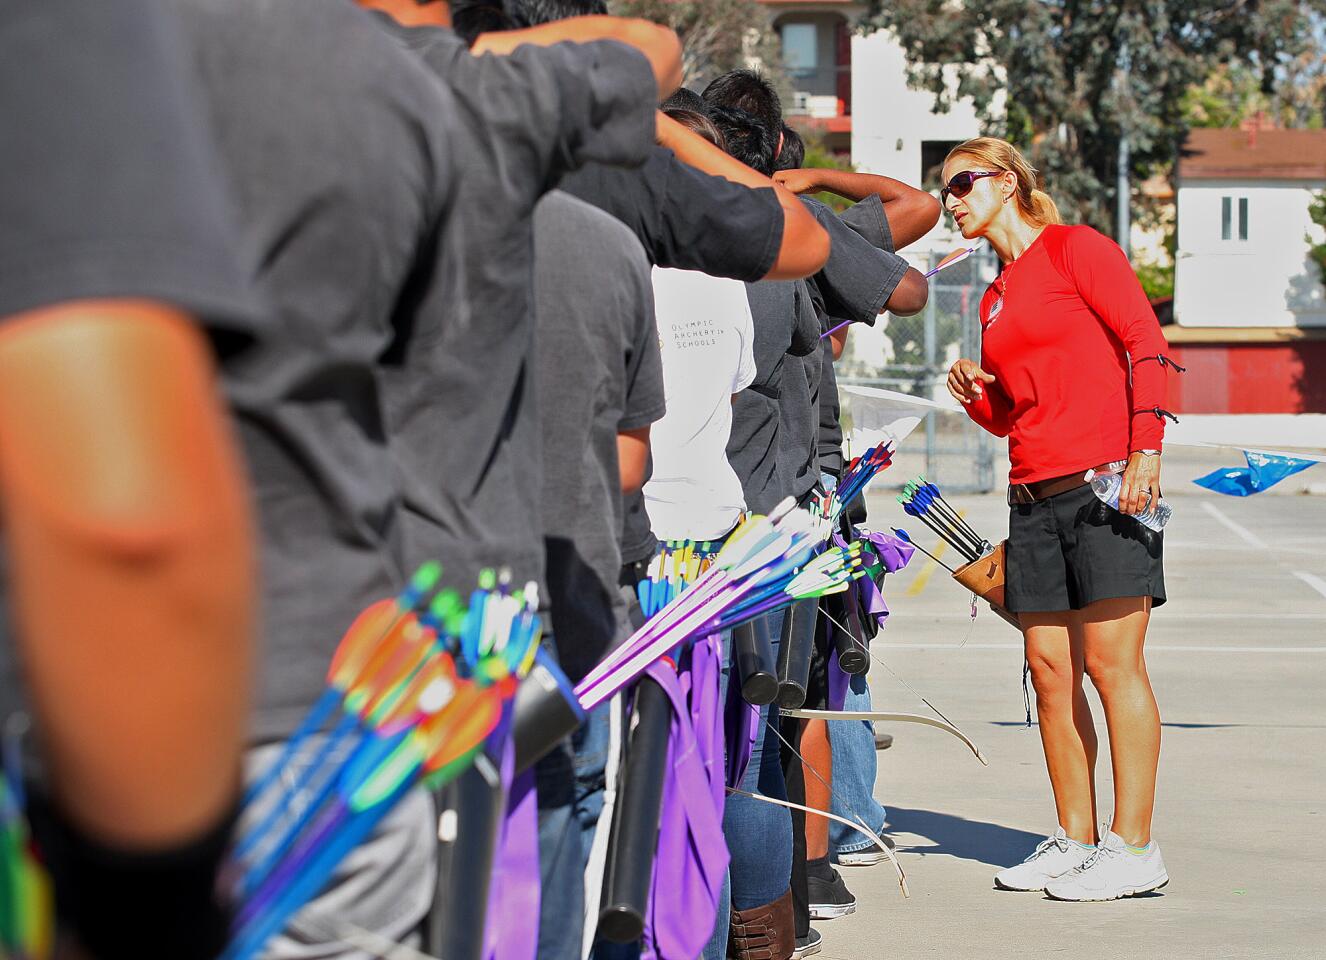 U.S. Olympic archer Khatuna Lorig looks closely at the form of a Glendale High School archer during a visit to the school on Tuesday, April 29, 2014. Lorig came to the archery program for the day at Glendale High School to help them develop their technique.